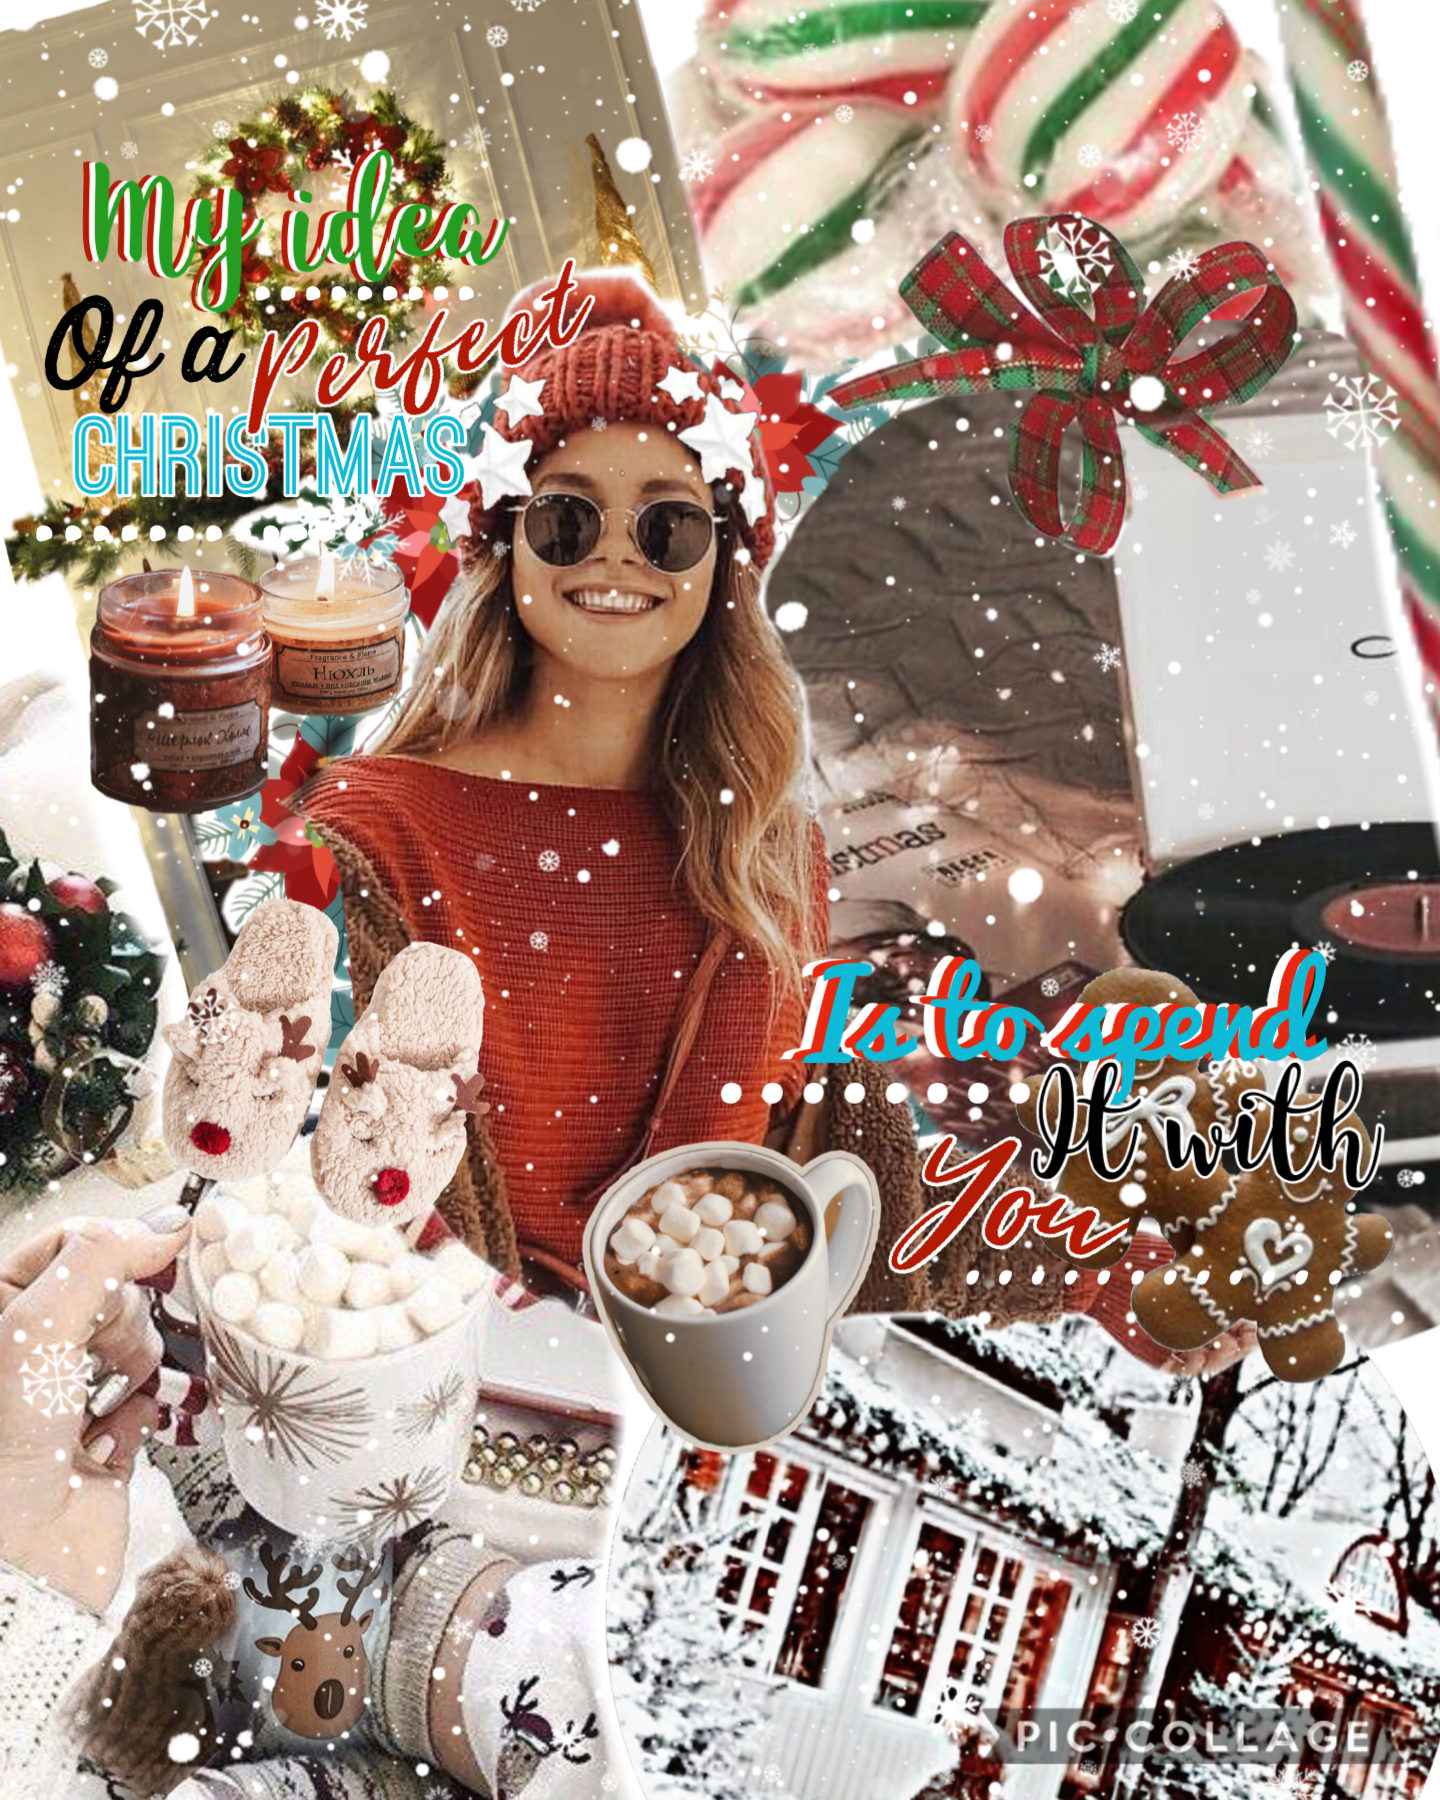 merry christmas pic collage! thanks for the amazing year! only 1 more till 1k!!! omg I’m so excited! I’ve had quite the break, how is everyone? 💗 hope you like this! i’ve been experimenting with so many styles...
Qotd: fave holiday/s? 